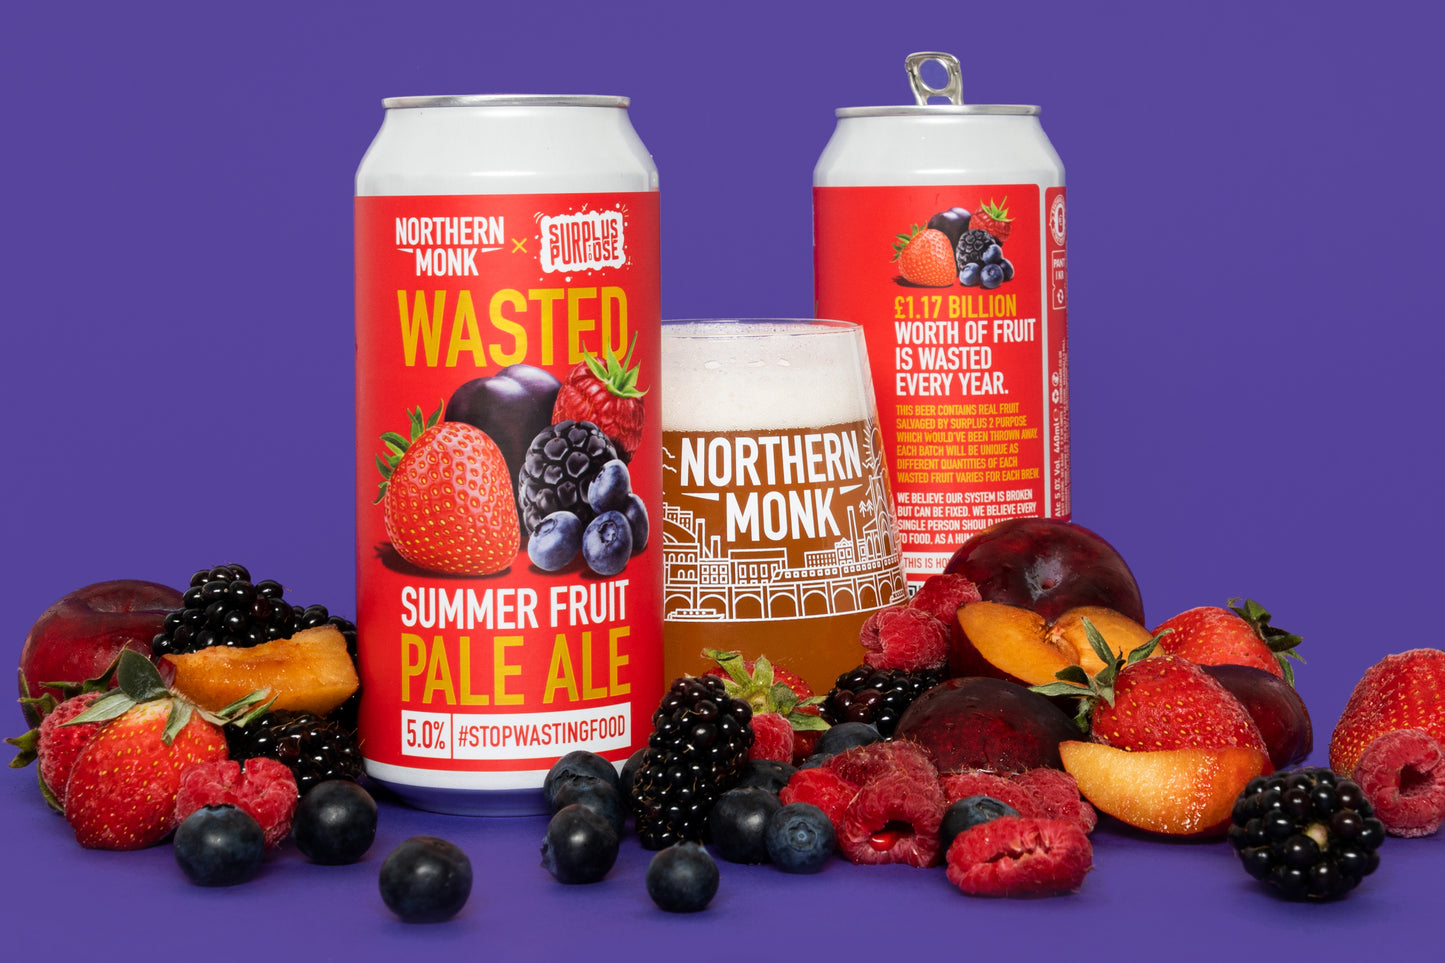 WASTED // SUMMER FRUITS // PALE ALE